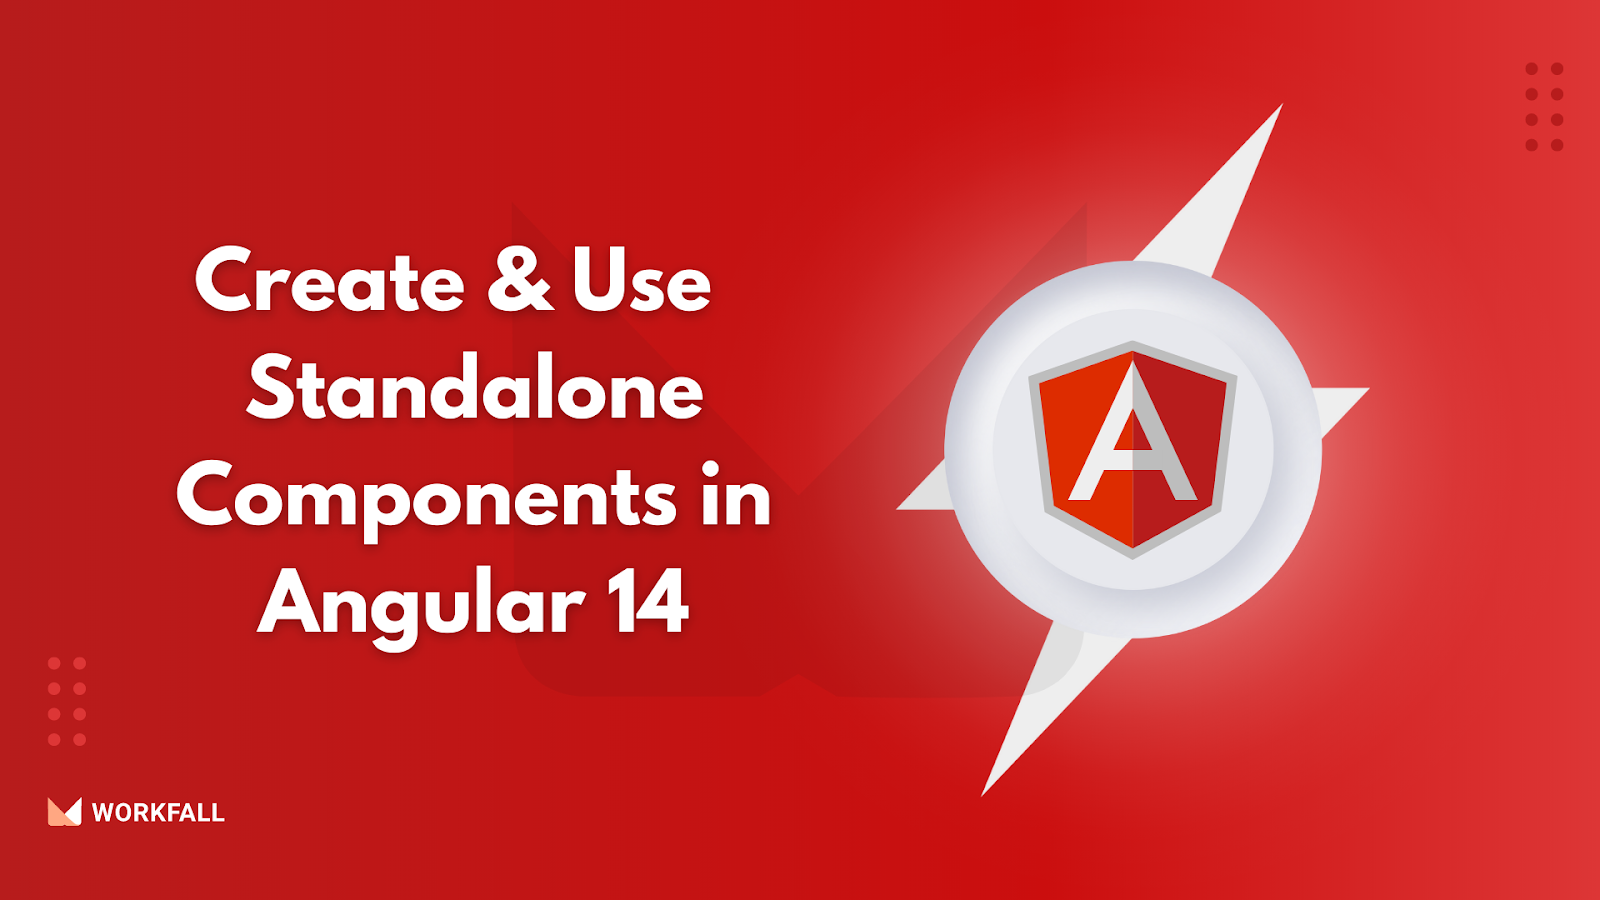 How to Create & Use Standalone Components in Angular 14?